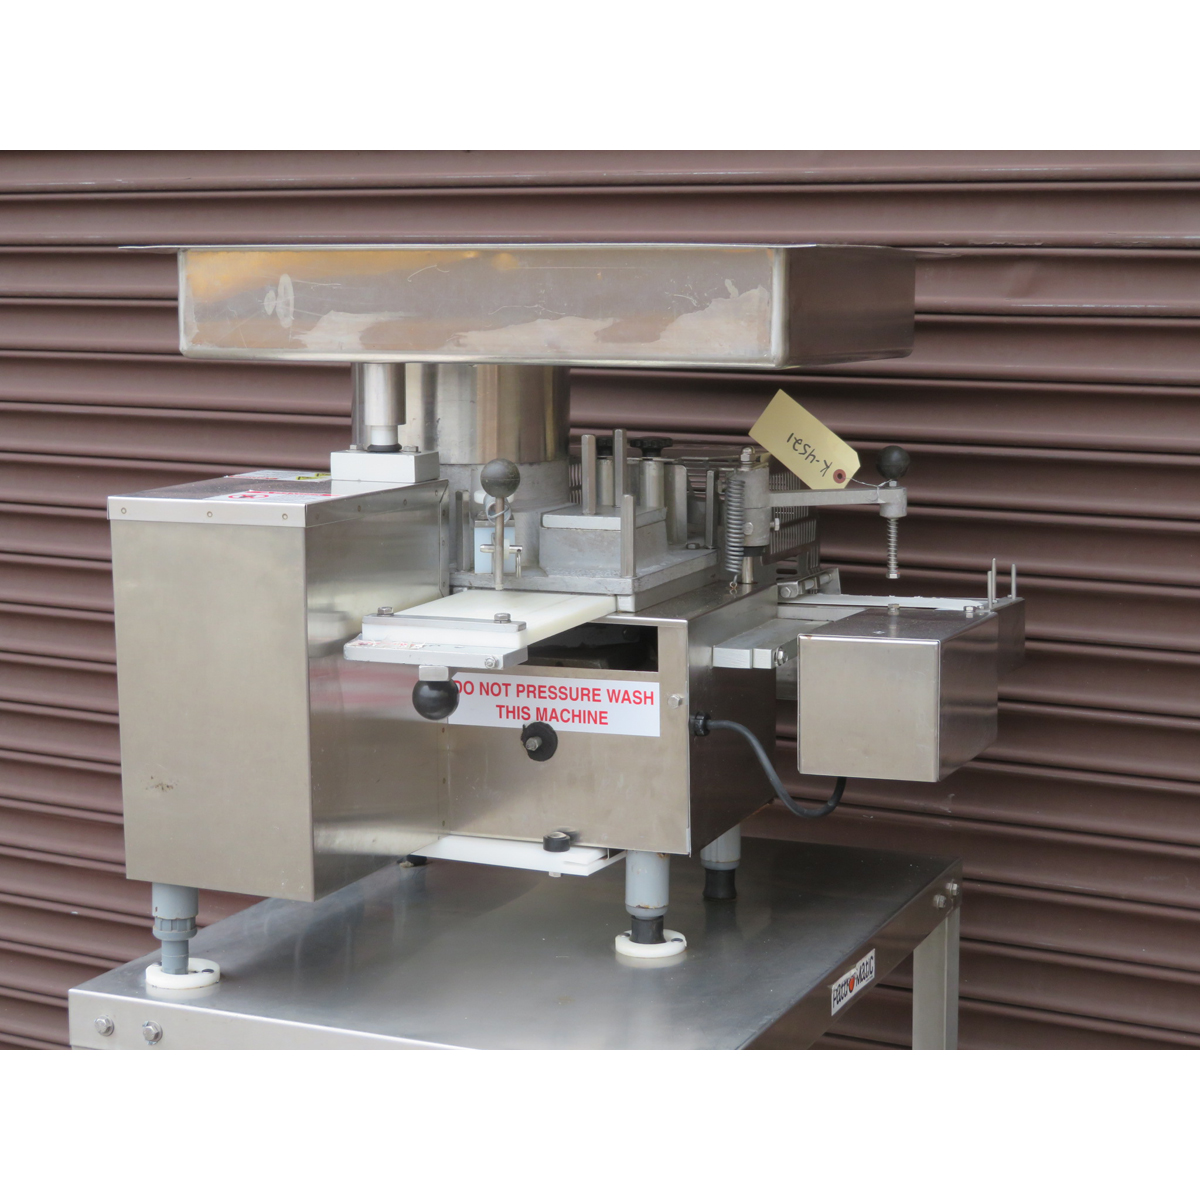 Patty-O-Matic 330PUB Patty Maker, Used Excellent Condition image 3